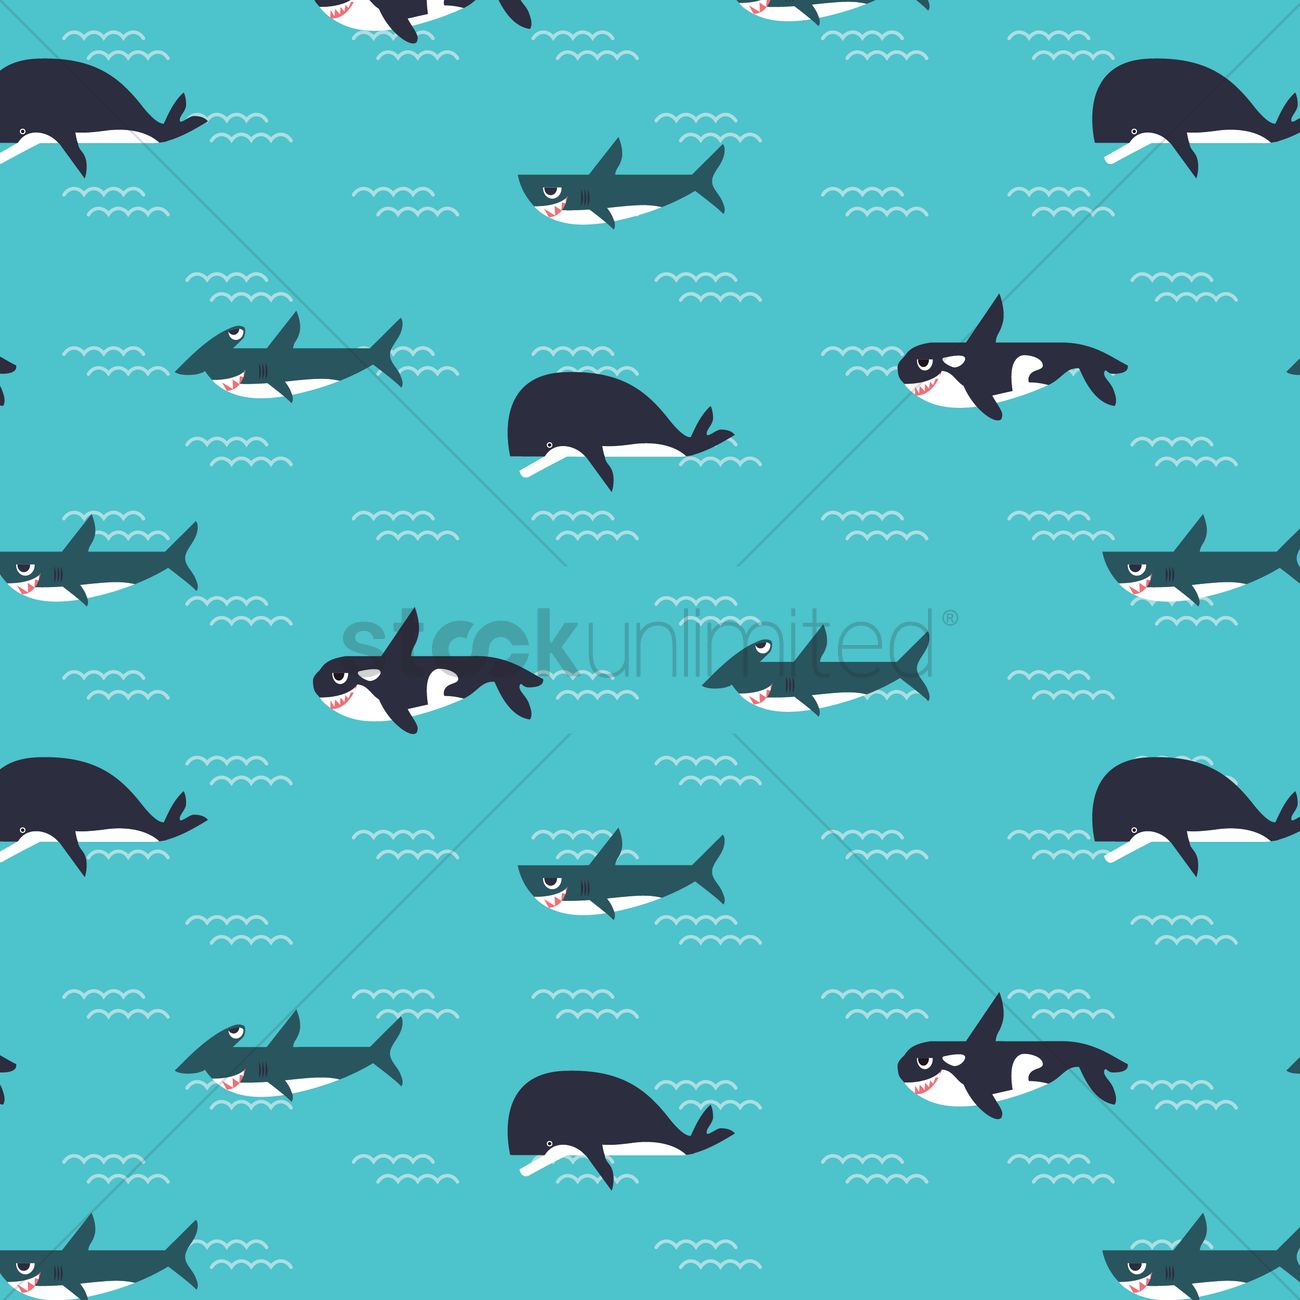 Whales Background Vector Image Stockunlimited